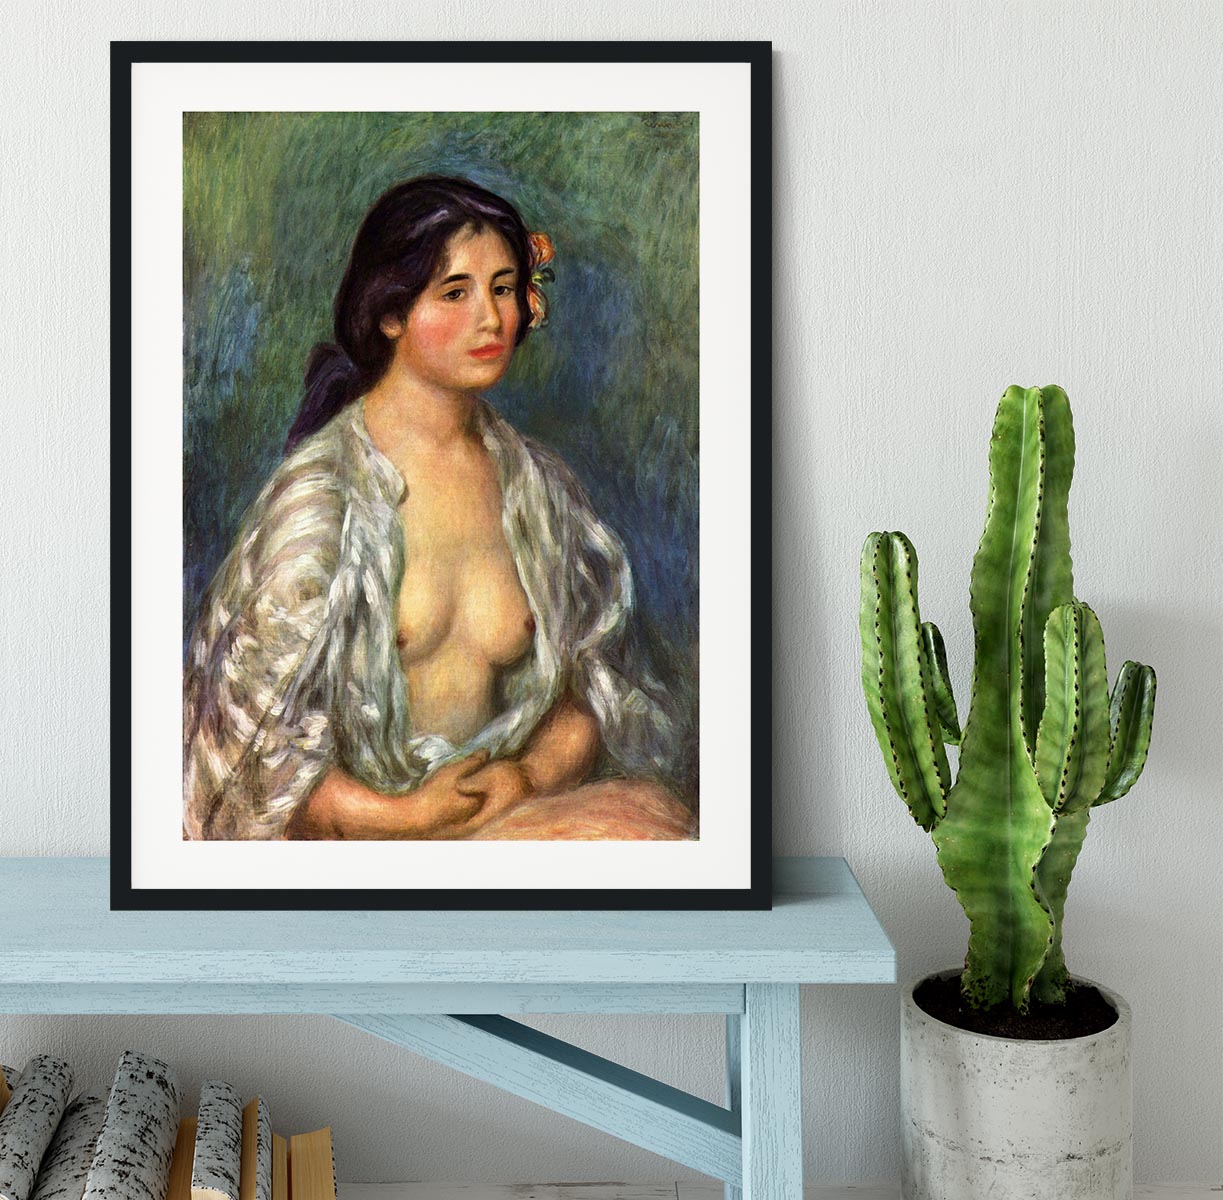 Gabrielle with open blouse by Renoir Framed Print - Canvas Art Rocks - 1